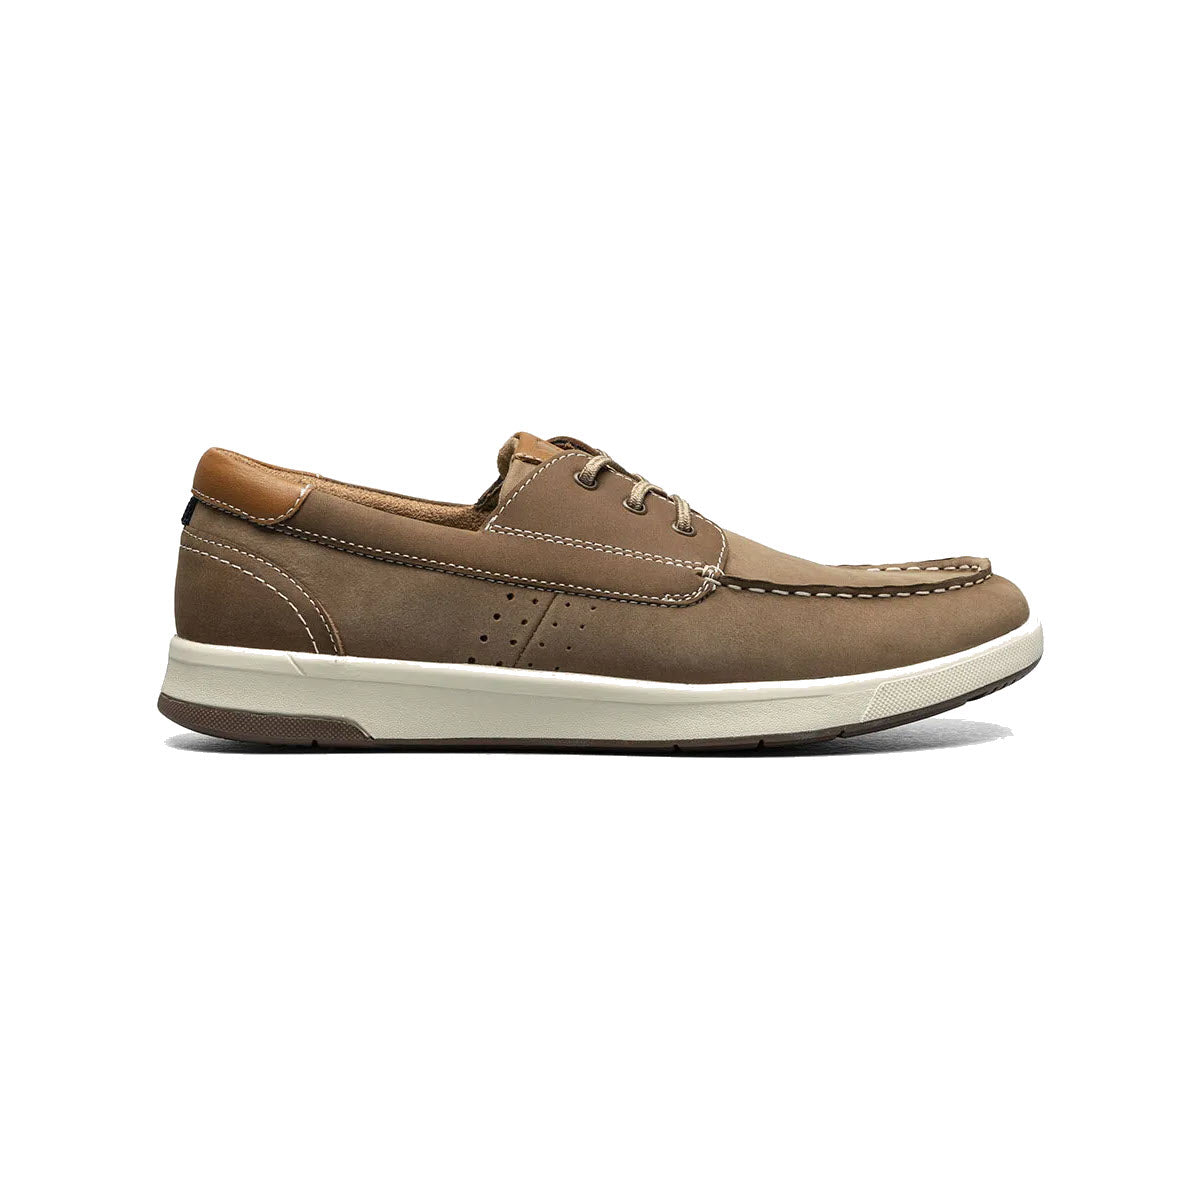 A single Florsheim Crossover Moc Toe boat shoe in mushroom nubuck leather with white laces and a light gray sole, displayed against a white background.